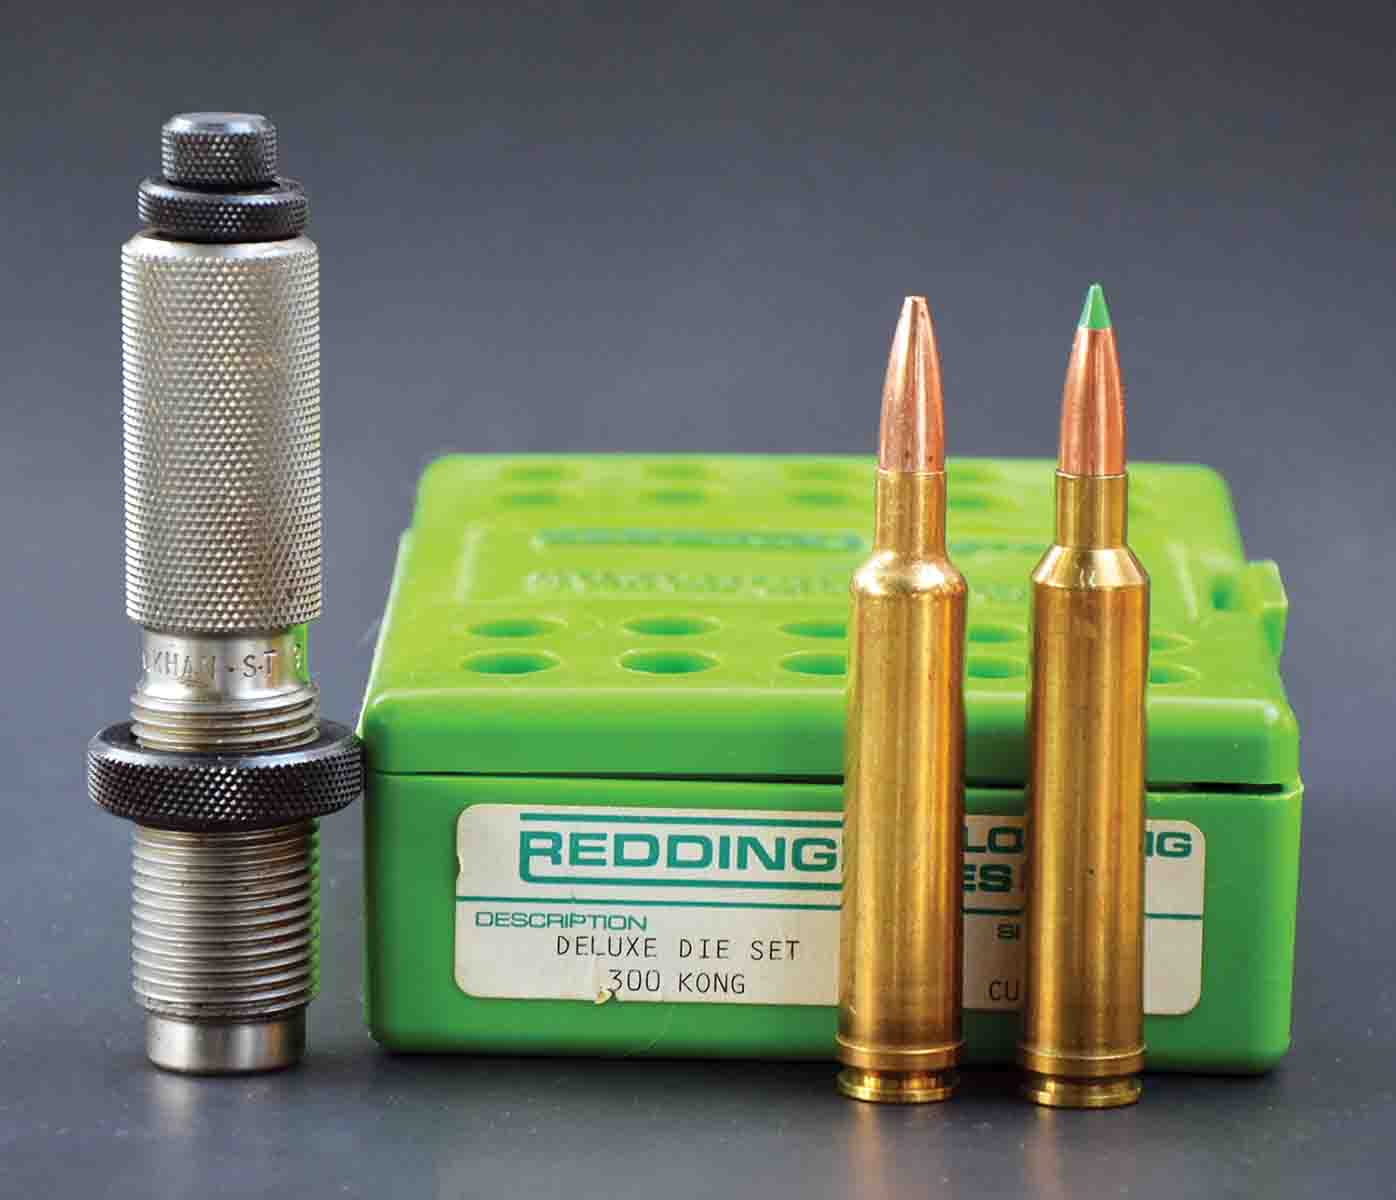 The .300 Kong (right) can be formed by running .30-378 Weatherby Magnum brass (left) through a Redding full-length resizing die and then fire-forming. The .378 Weatherby Magnum case can also be used.